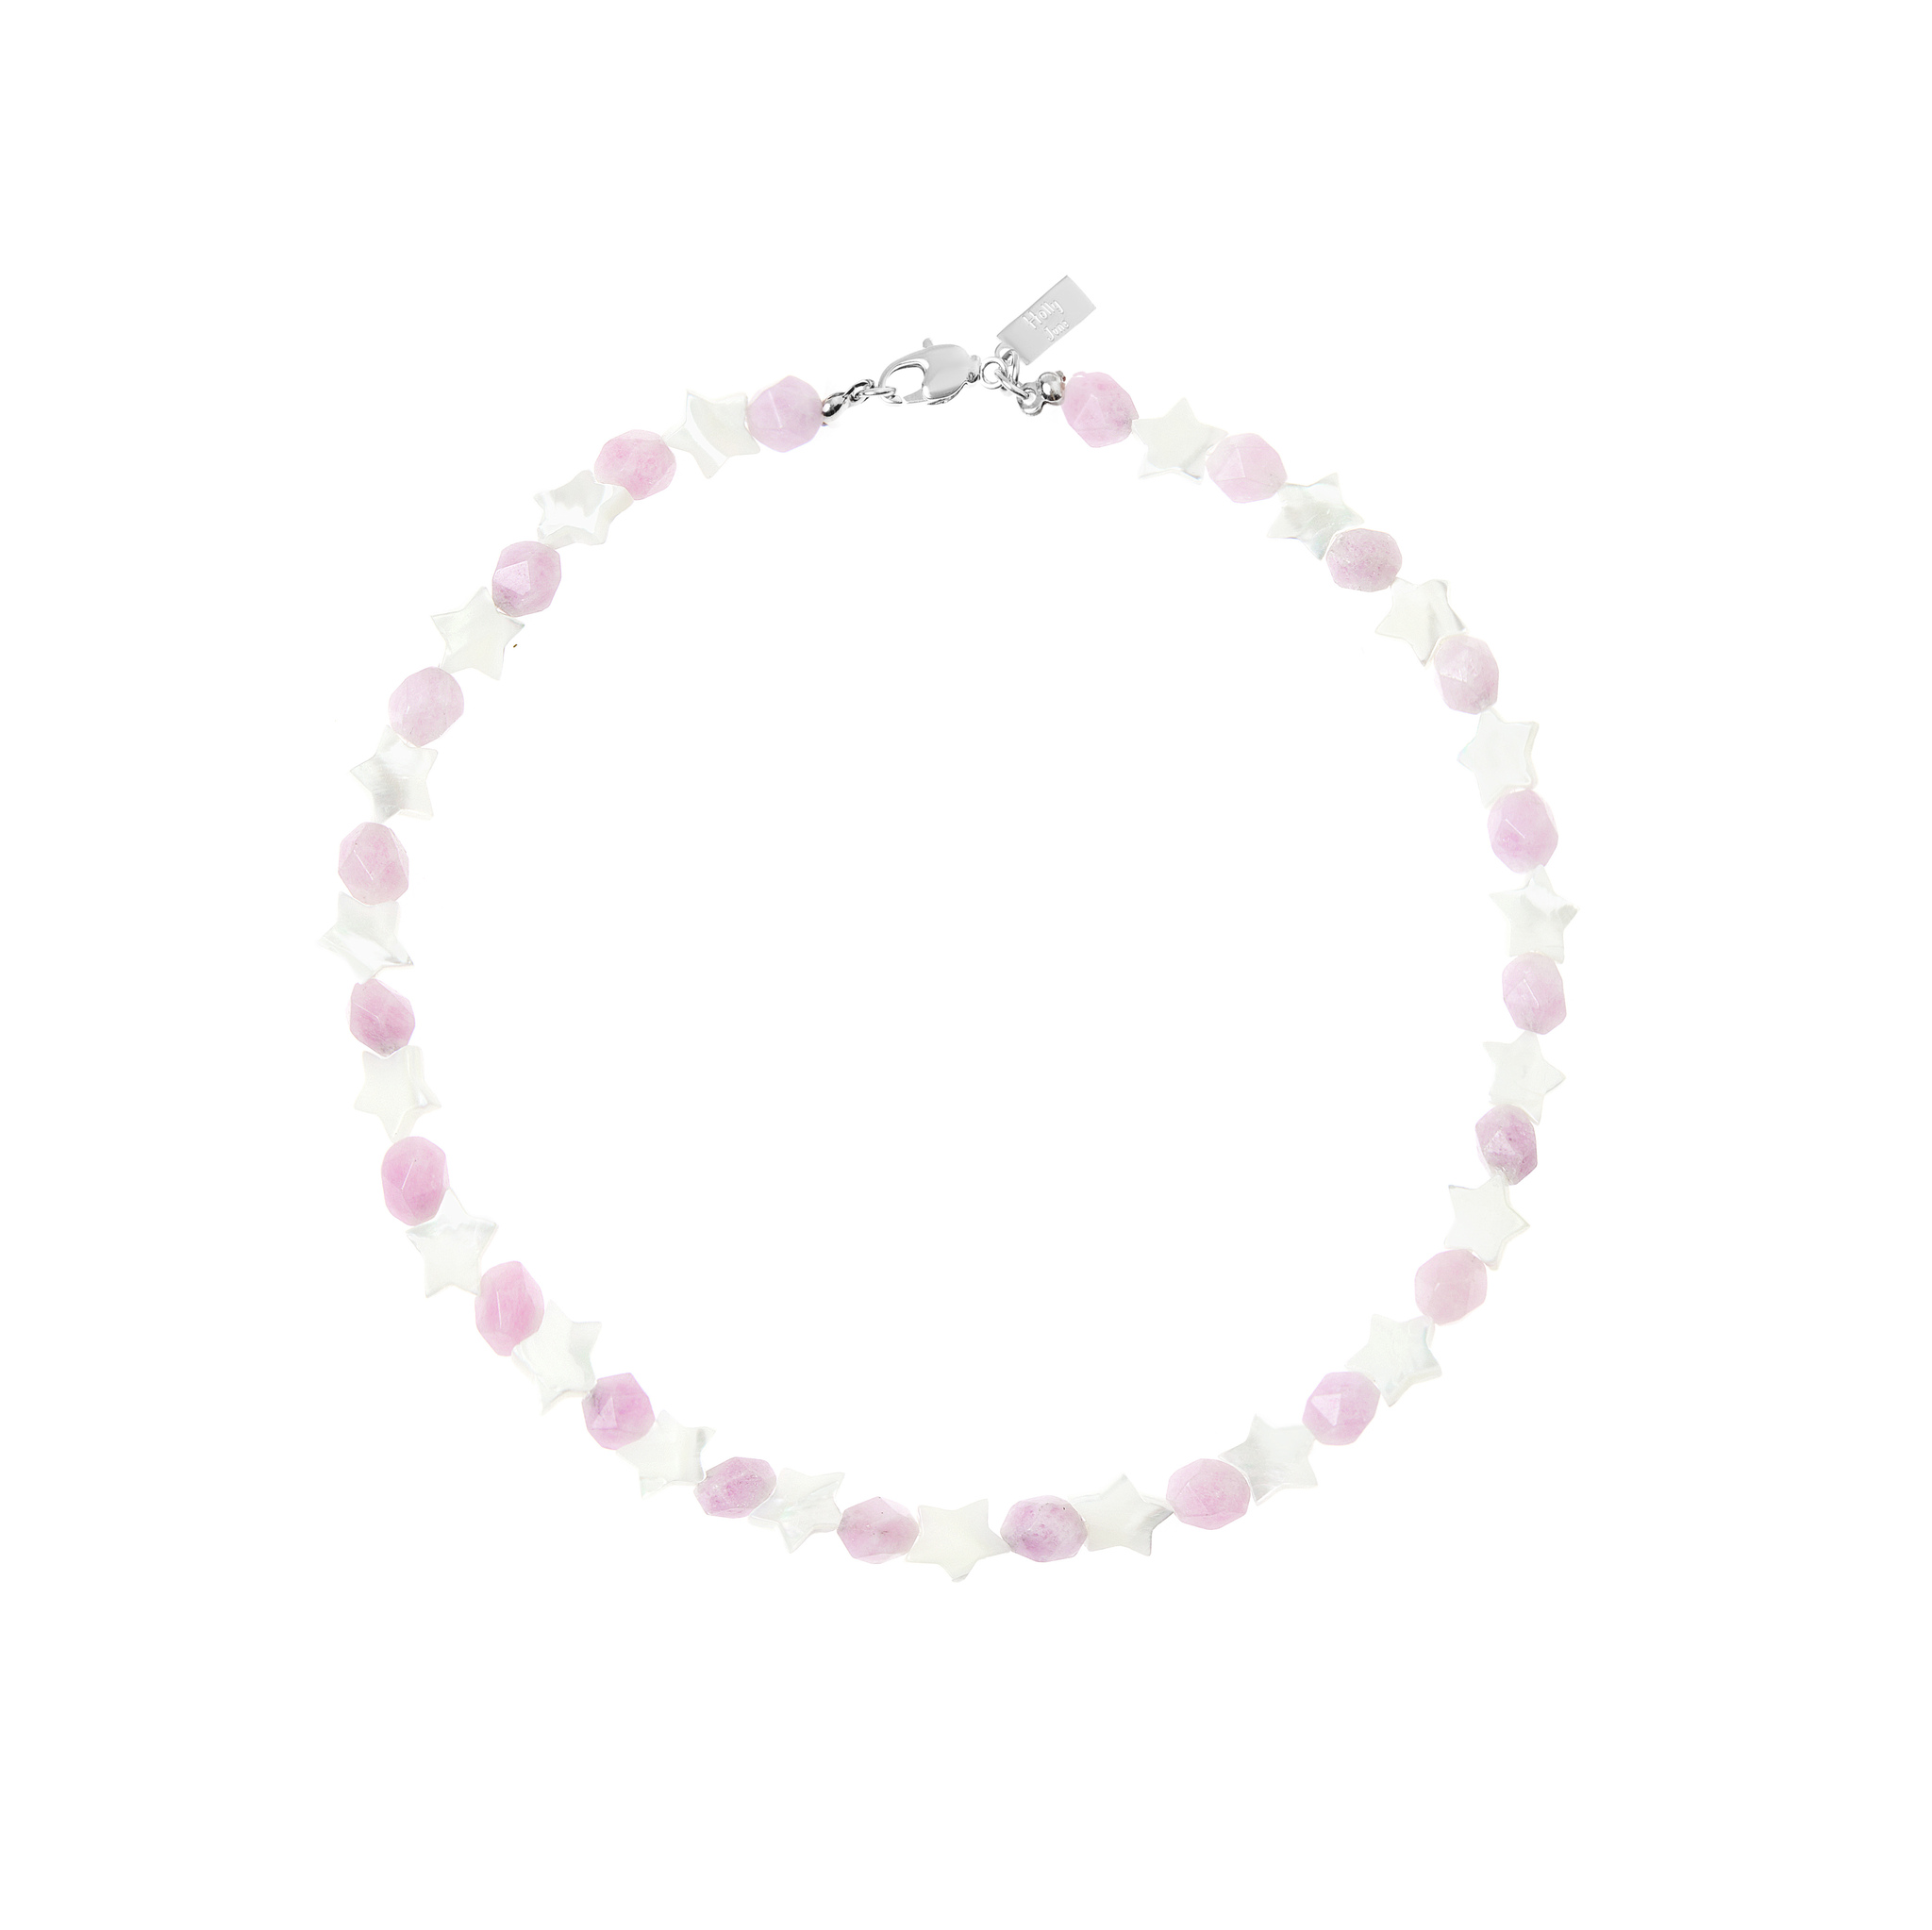 HOLLY JUNE Колье Candy Star Necklace – Lilac holly june колье pearl with star necklace